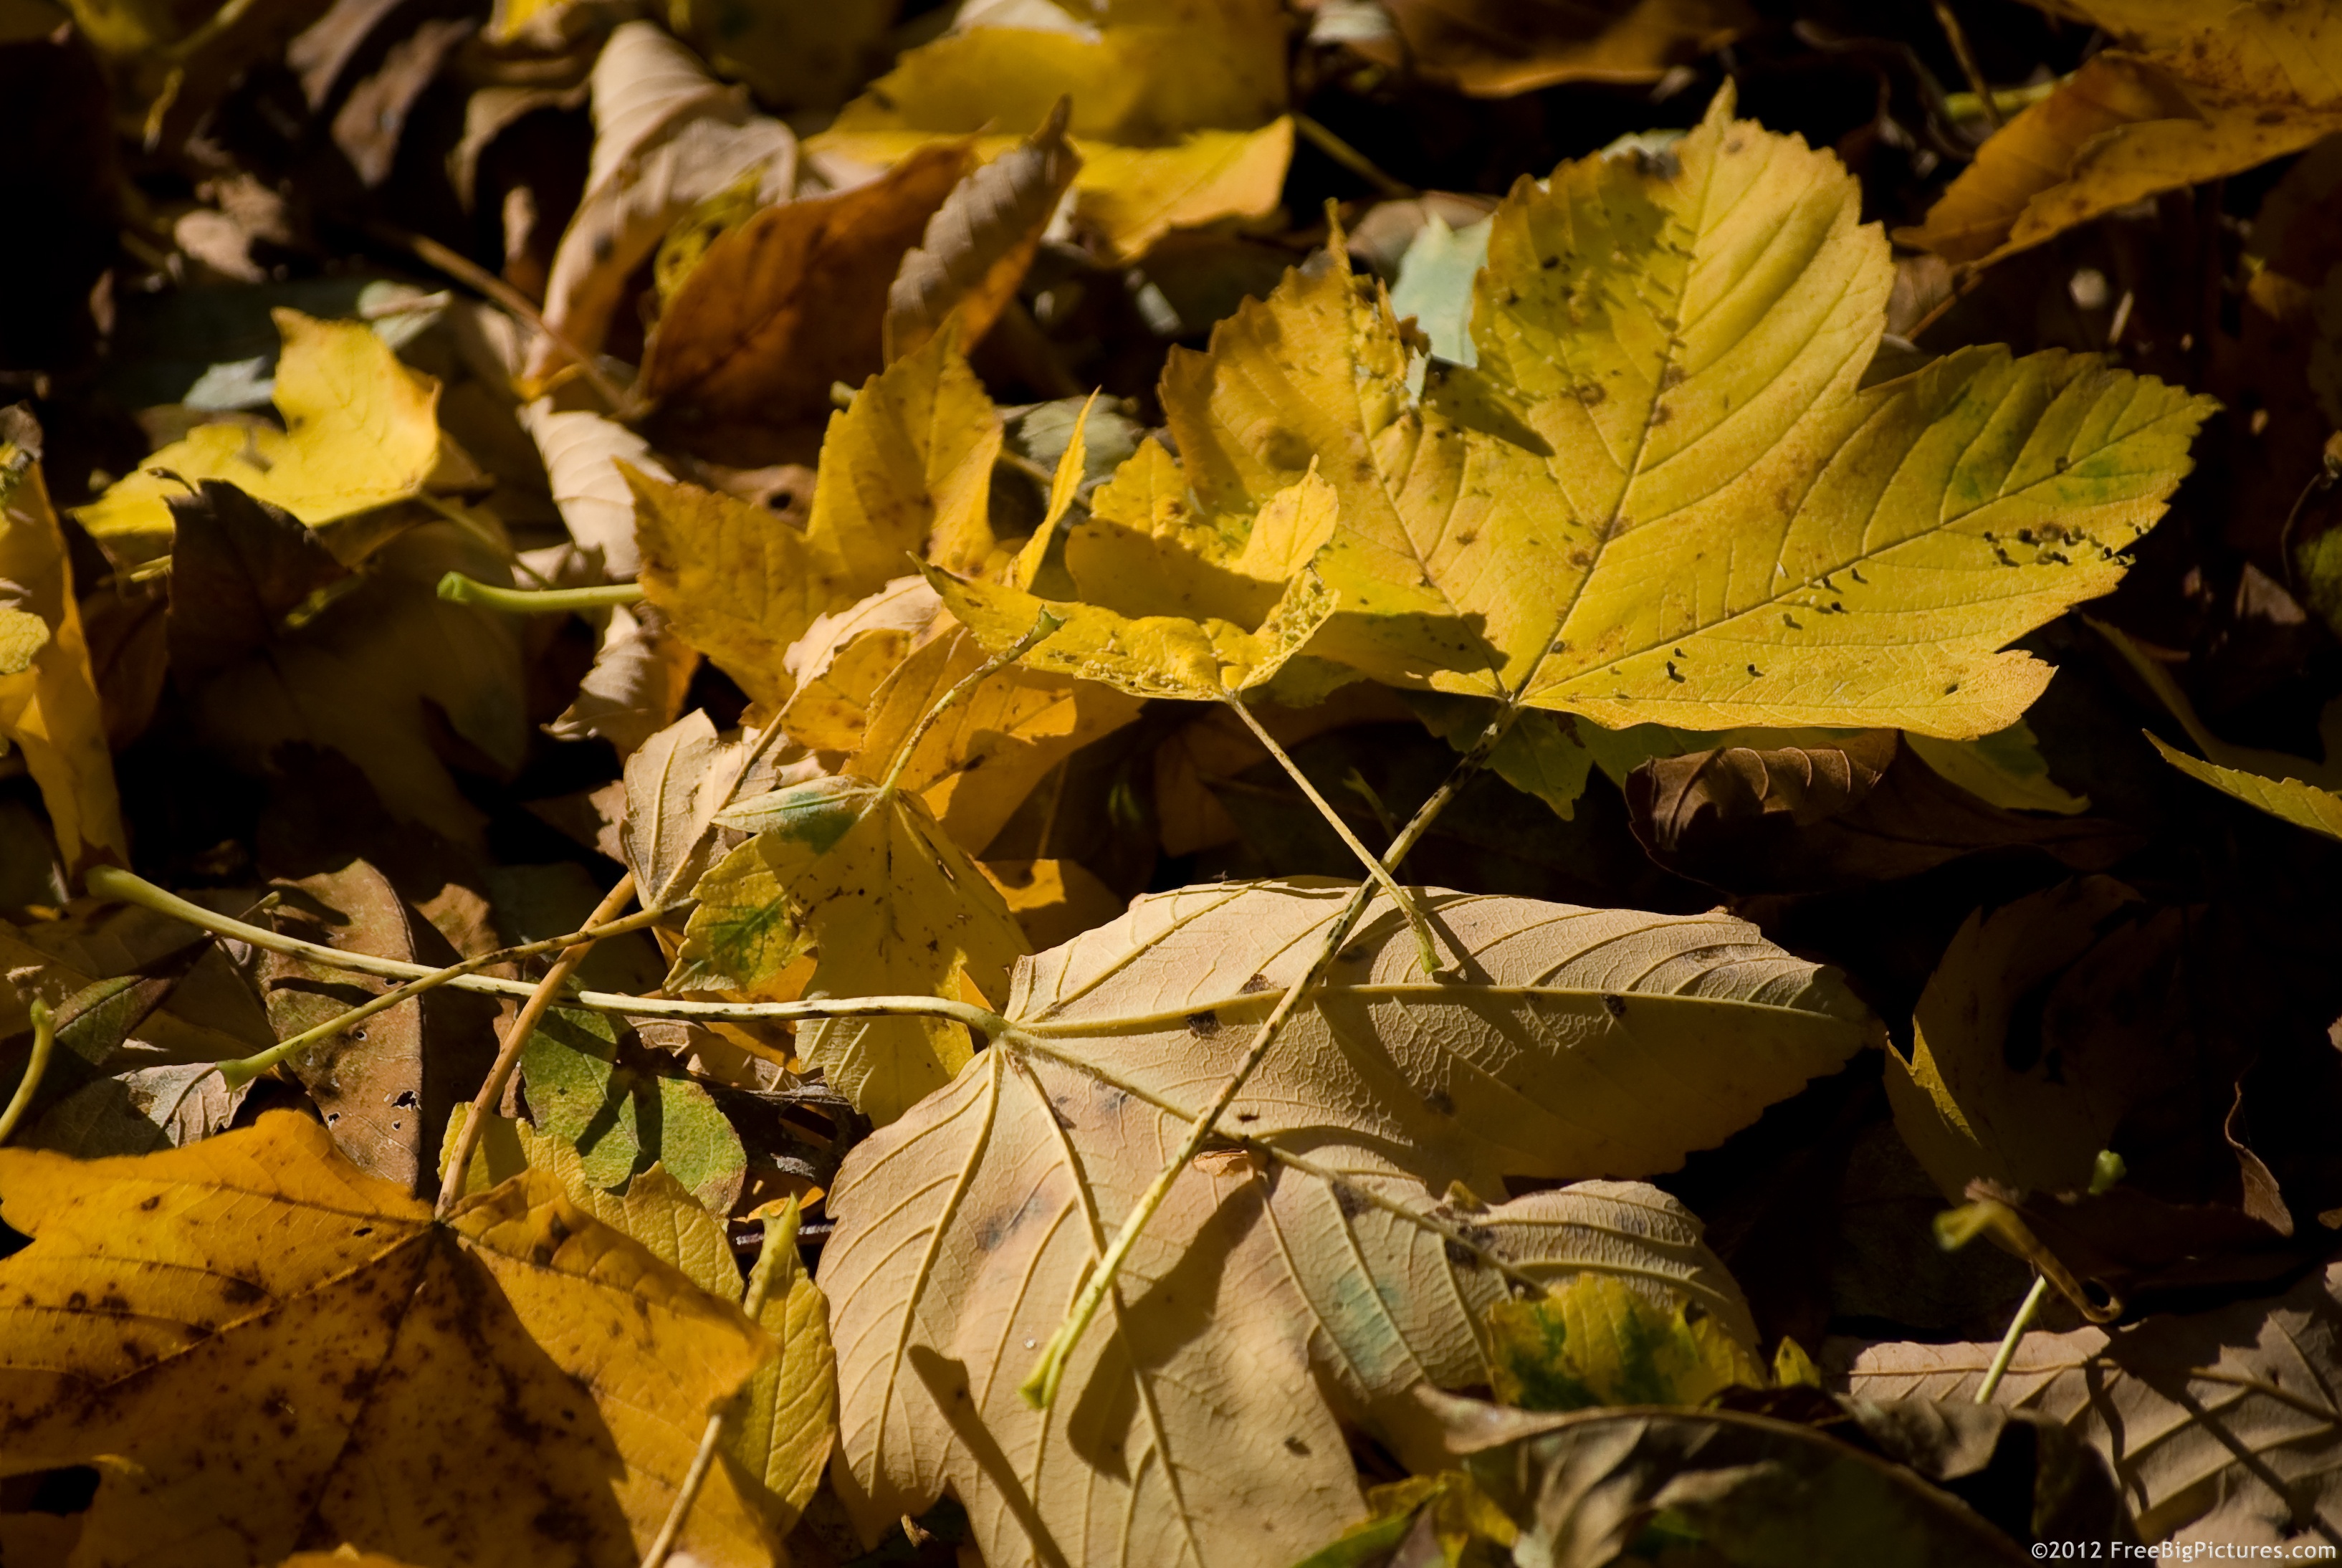 Fallen leaves in autumn in a deciduous forest